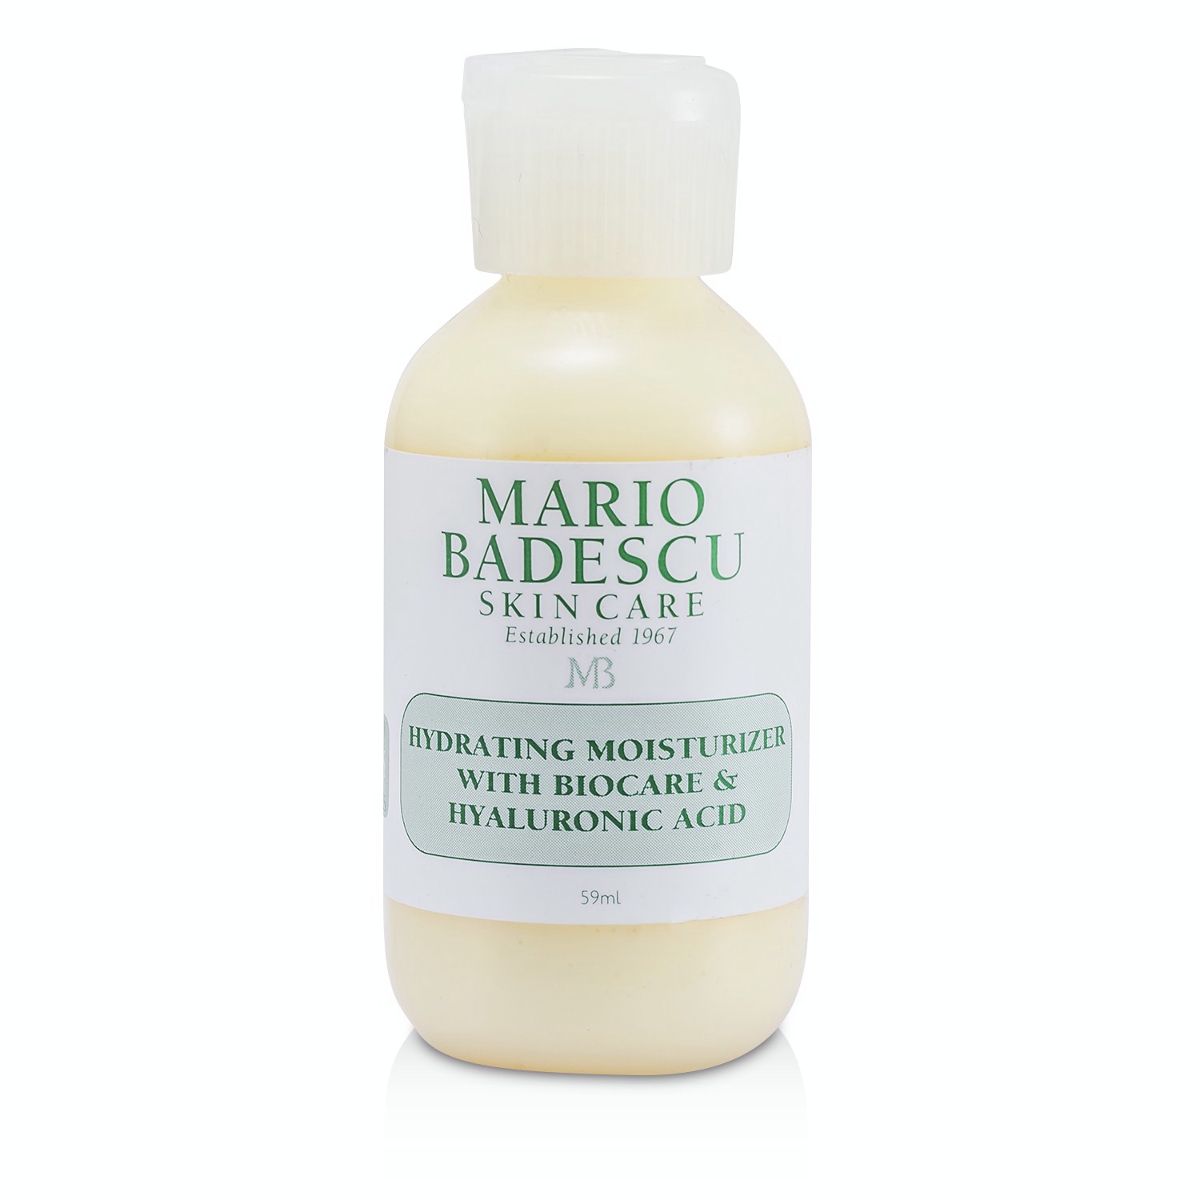 Hydrating Moisturizer With Biocare  Hyaluronic Acid - For Dry/ Sensitive Skin Types Mario Badescu Image